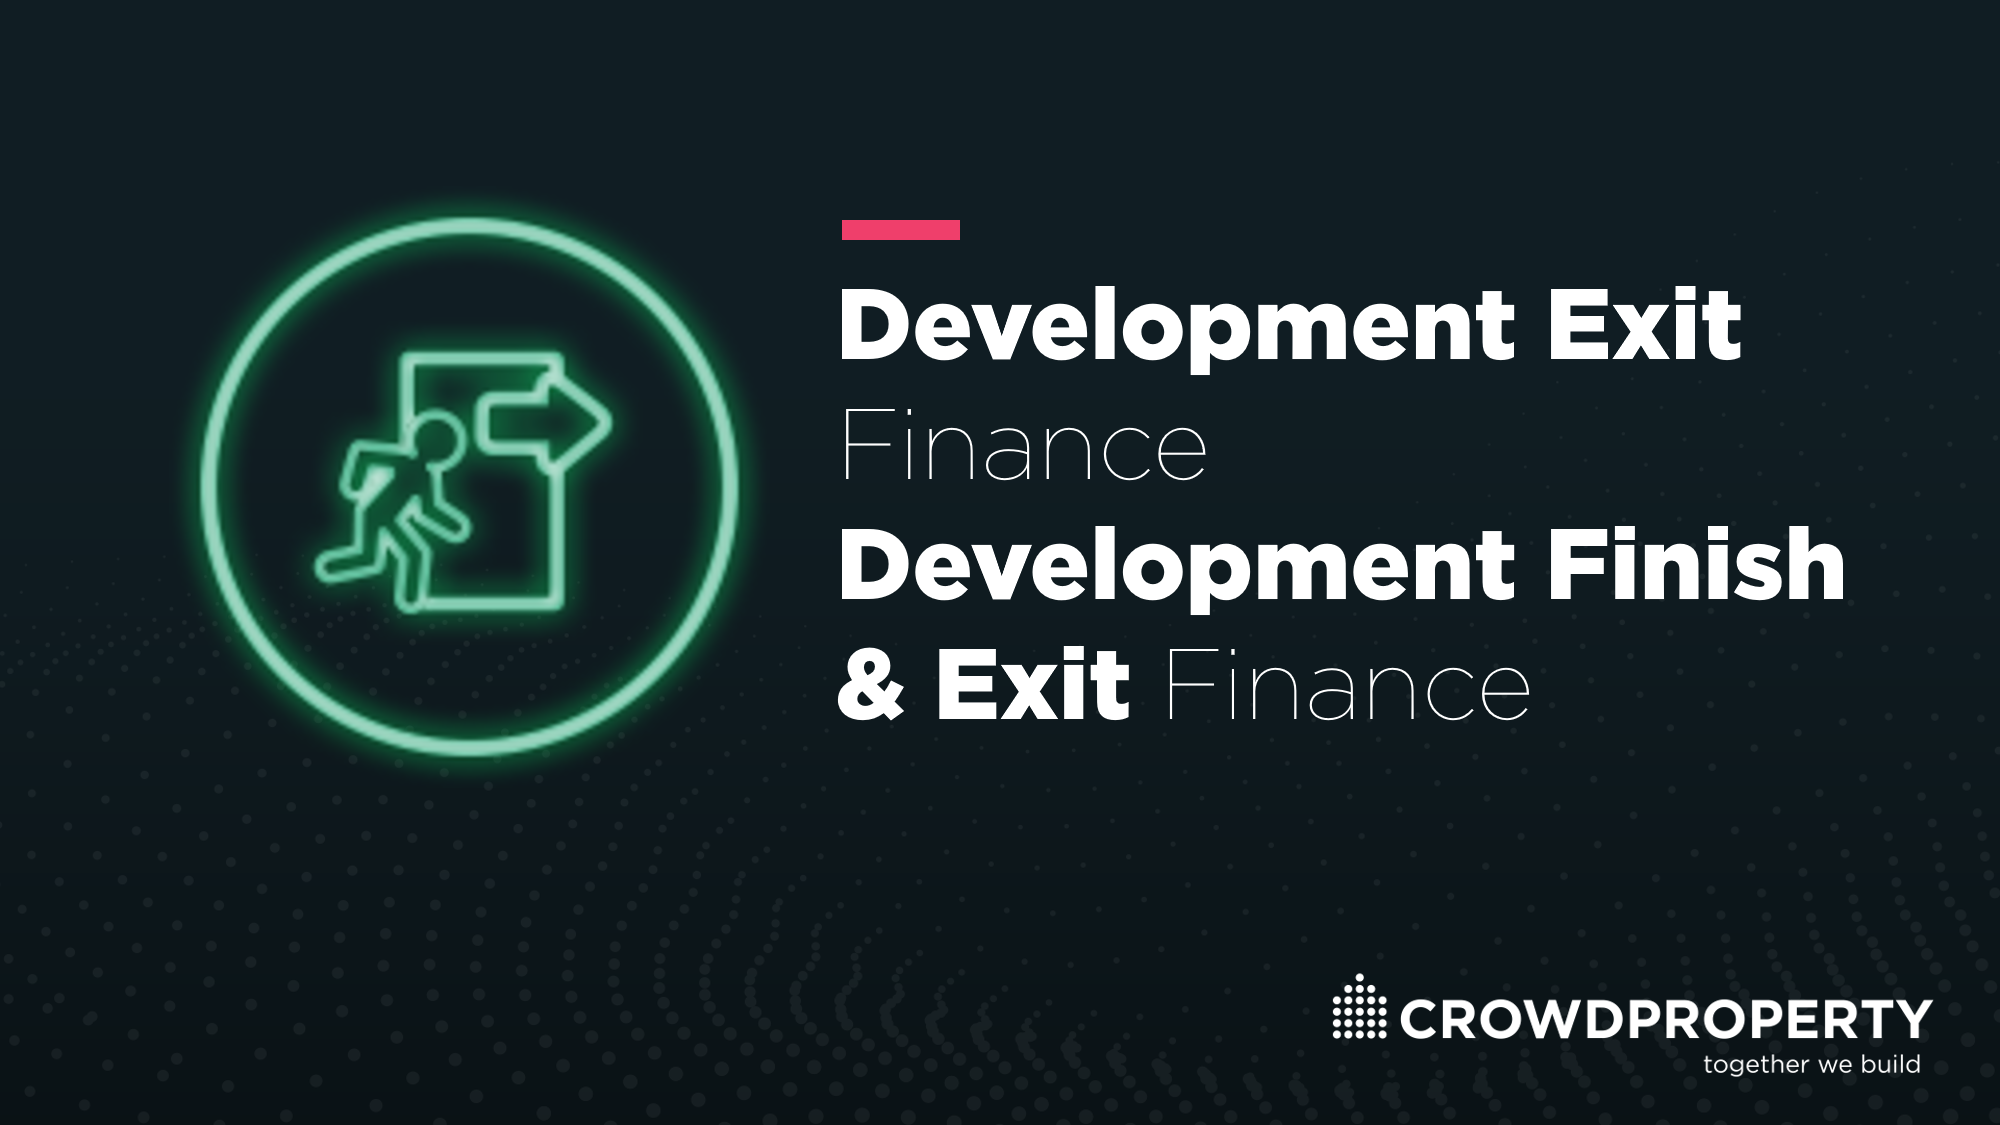 CrowdProperty Development Exit Finance by Property People